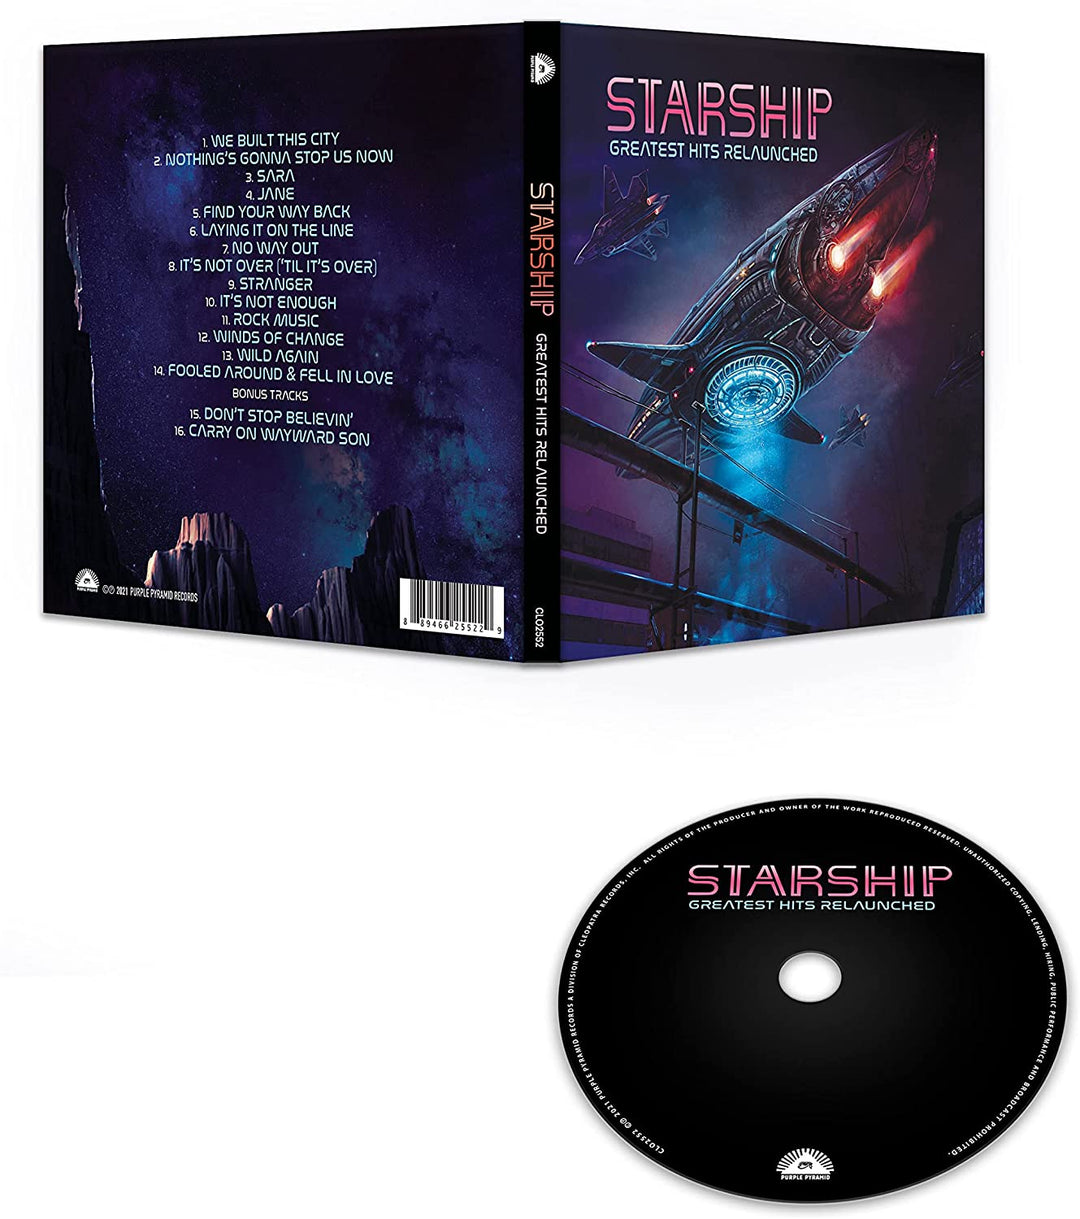 Starship - Greatest Hits Relaunched [Audio CD]